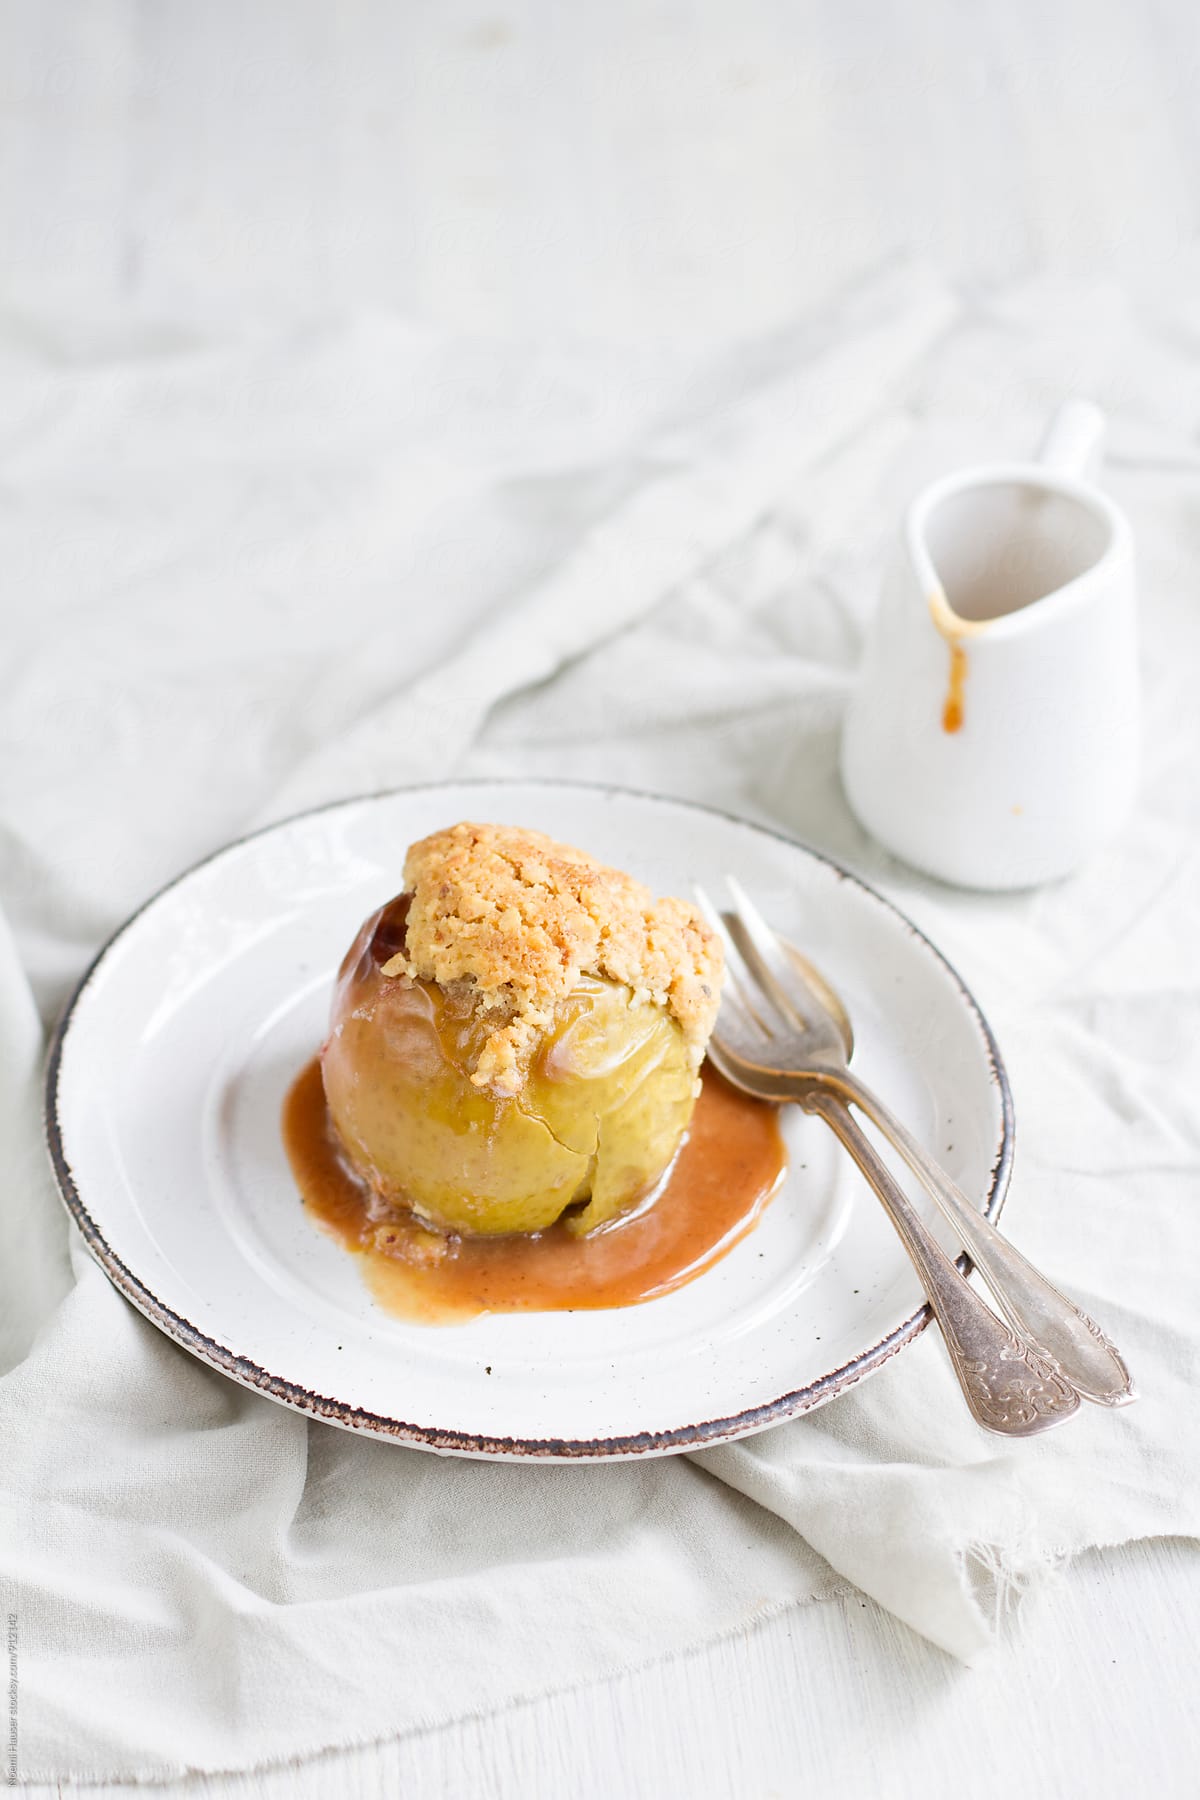 Baked apple with caramel sauce